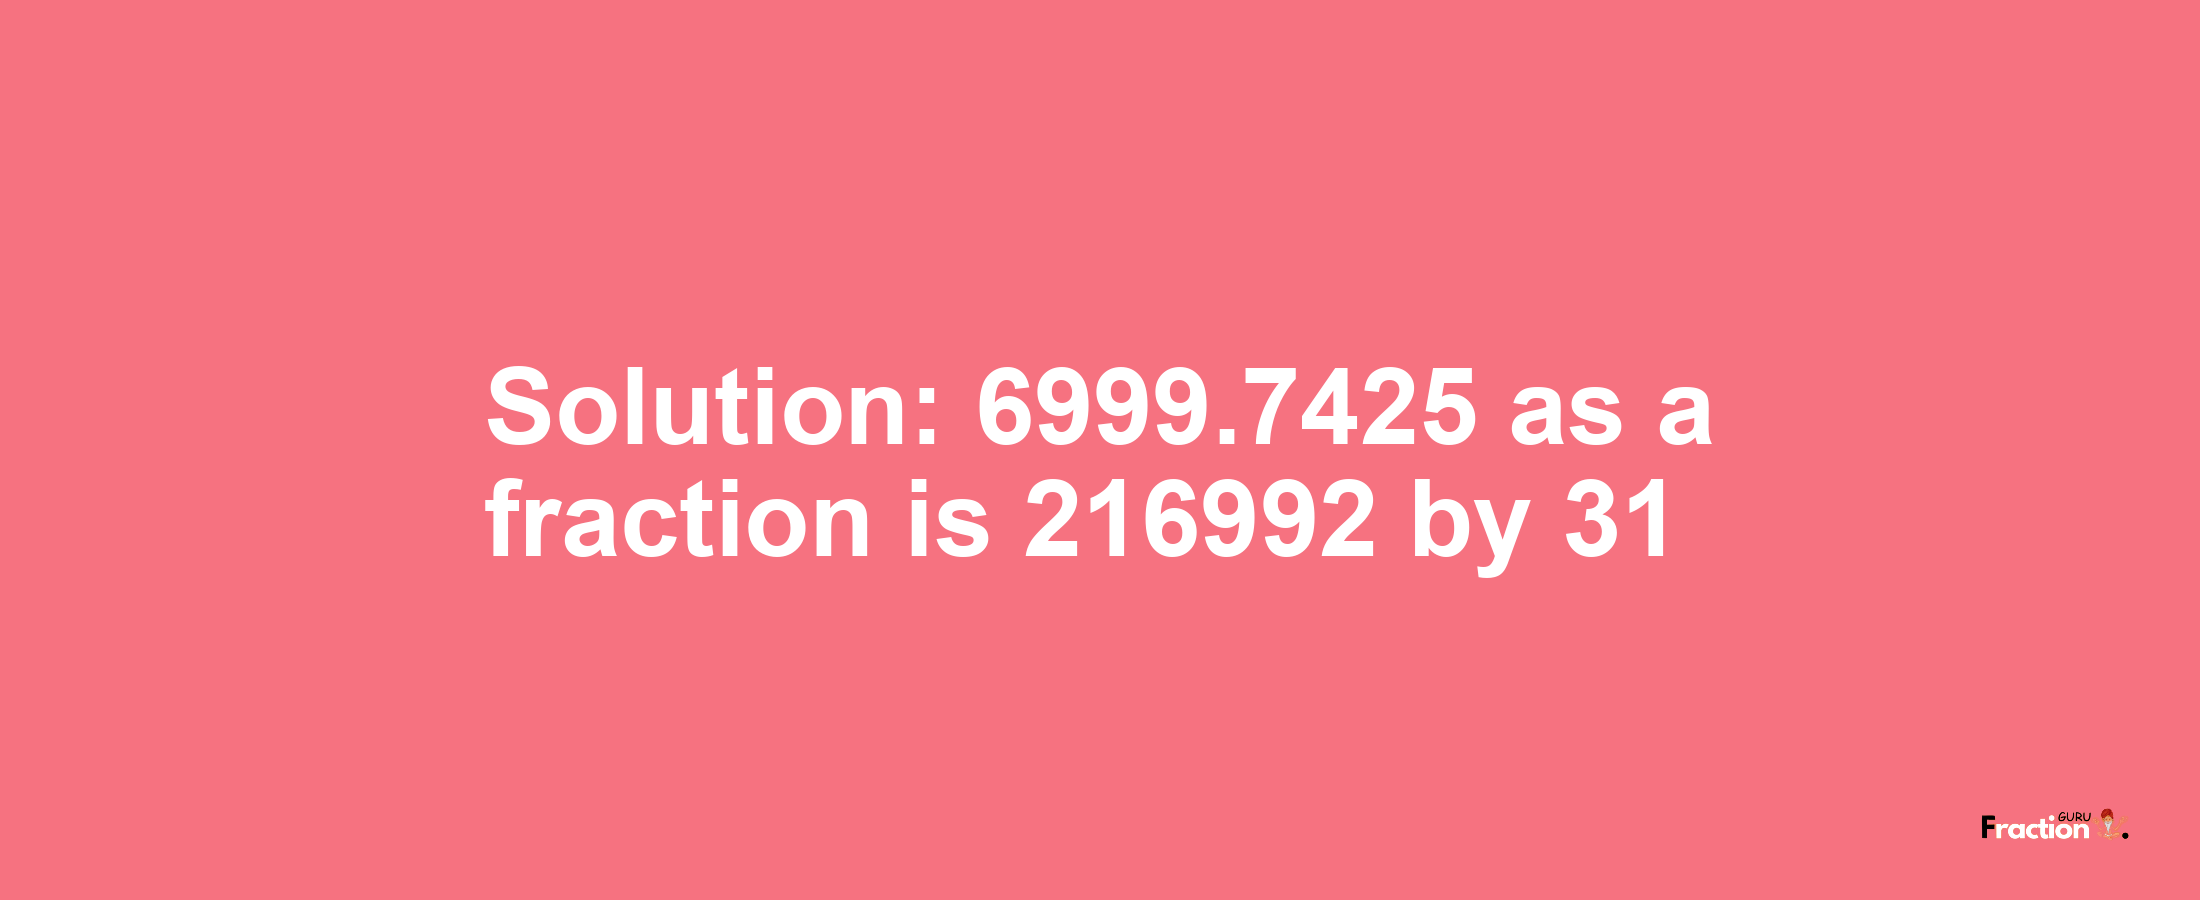 Solution:6999.7425 as a fraction is 216992/31